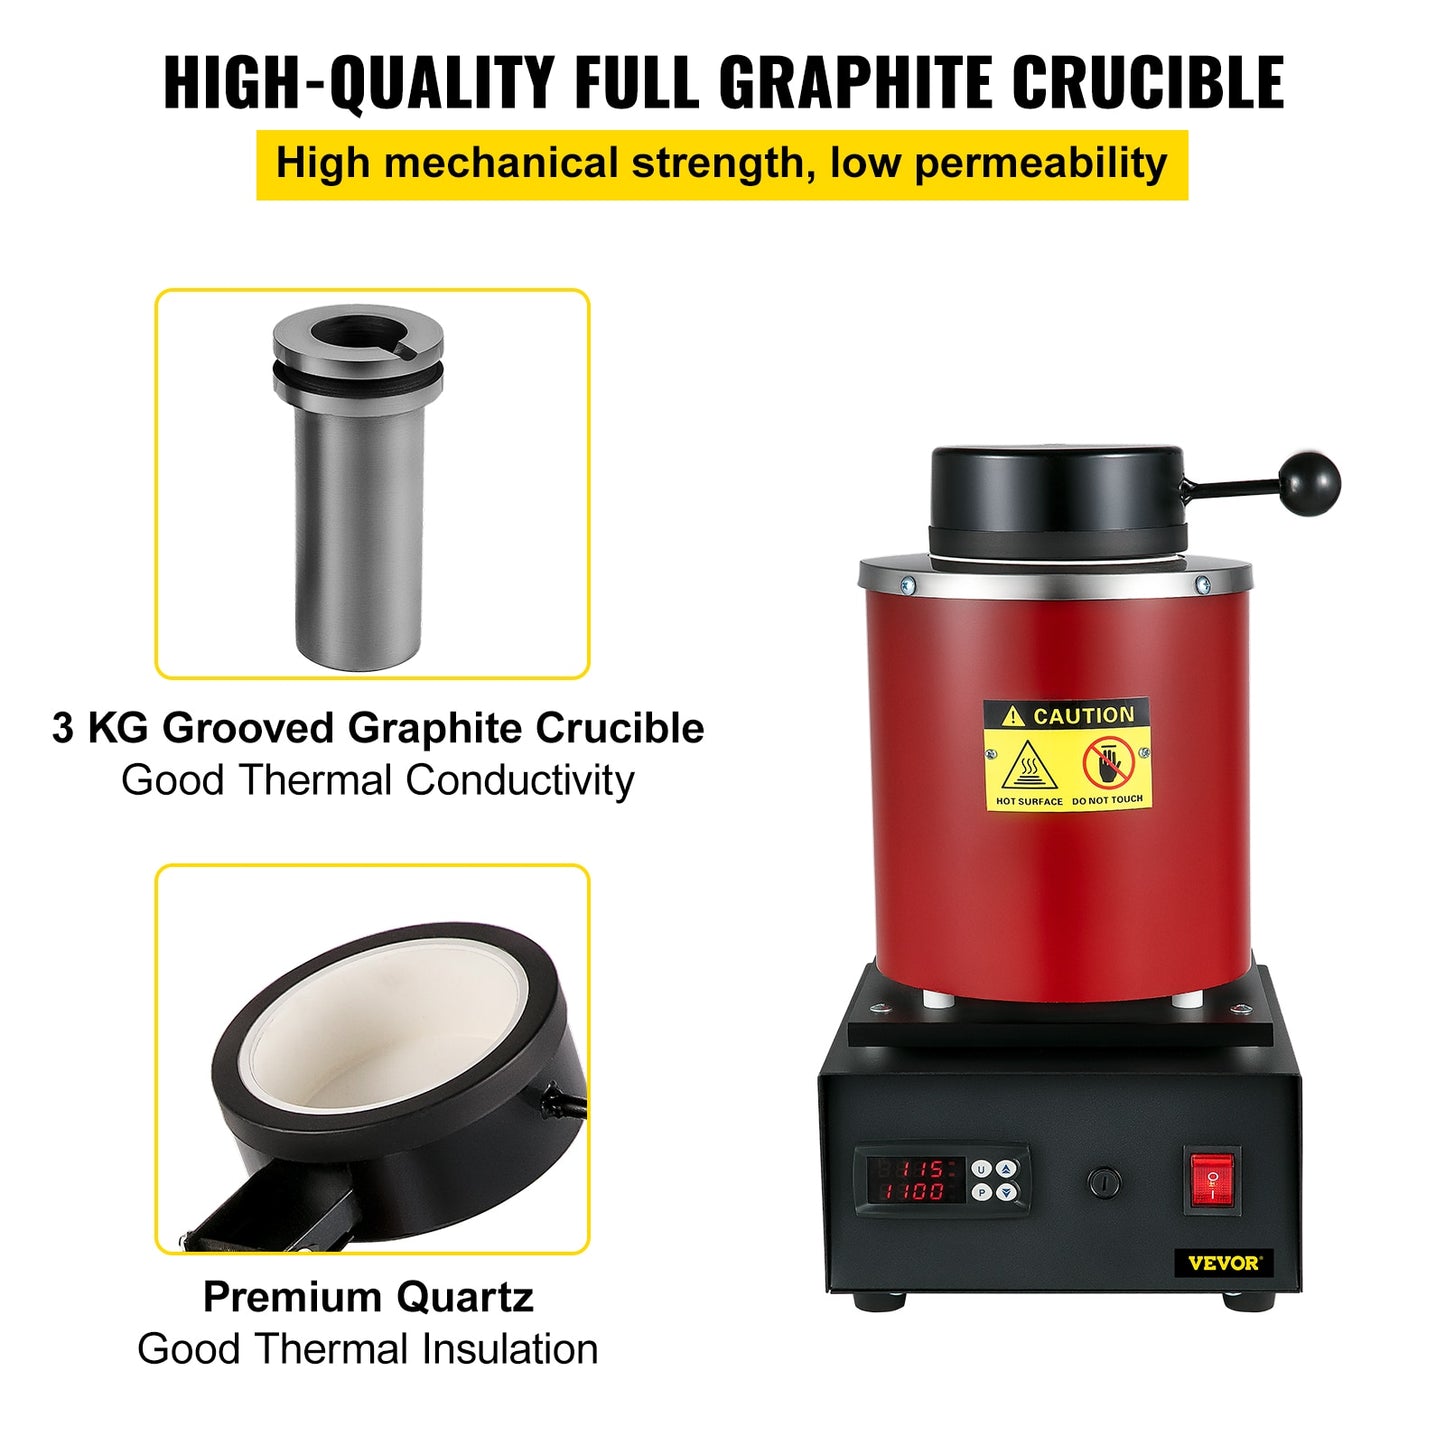 Electric Metal Melting Furnace, Digital, Casting Jewelry, Tools, Gold Silver Aluminum Graphite Refining Crucible Machine